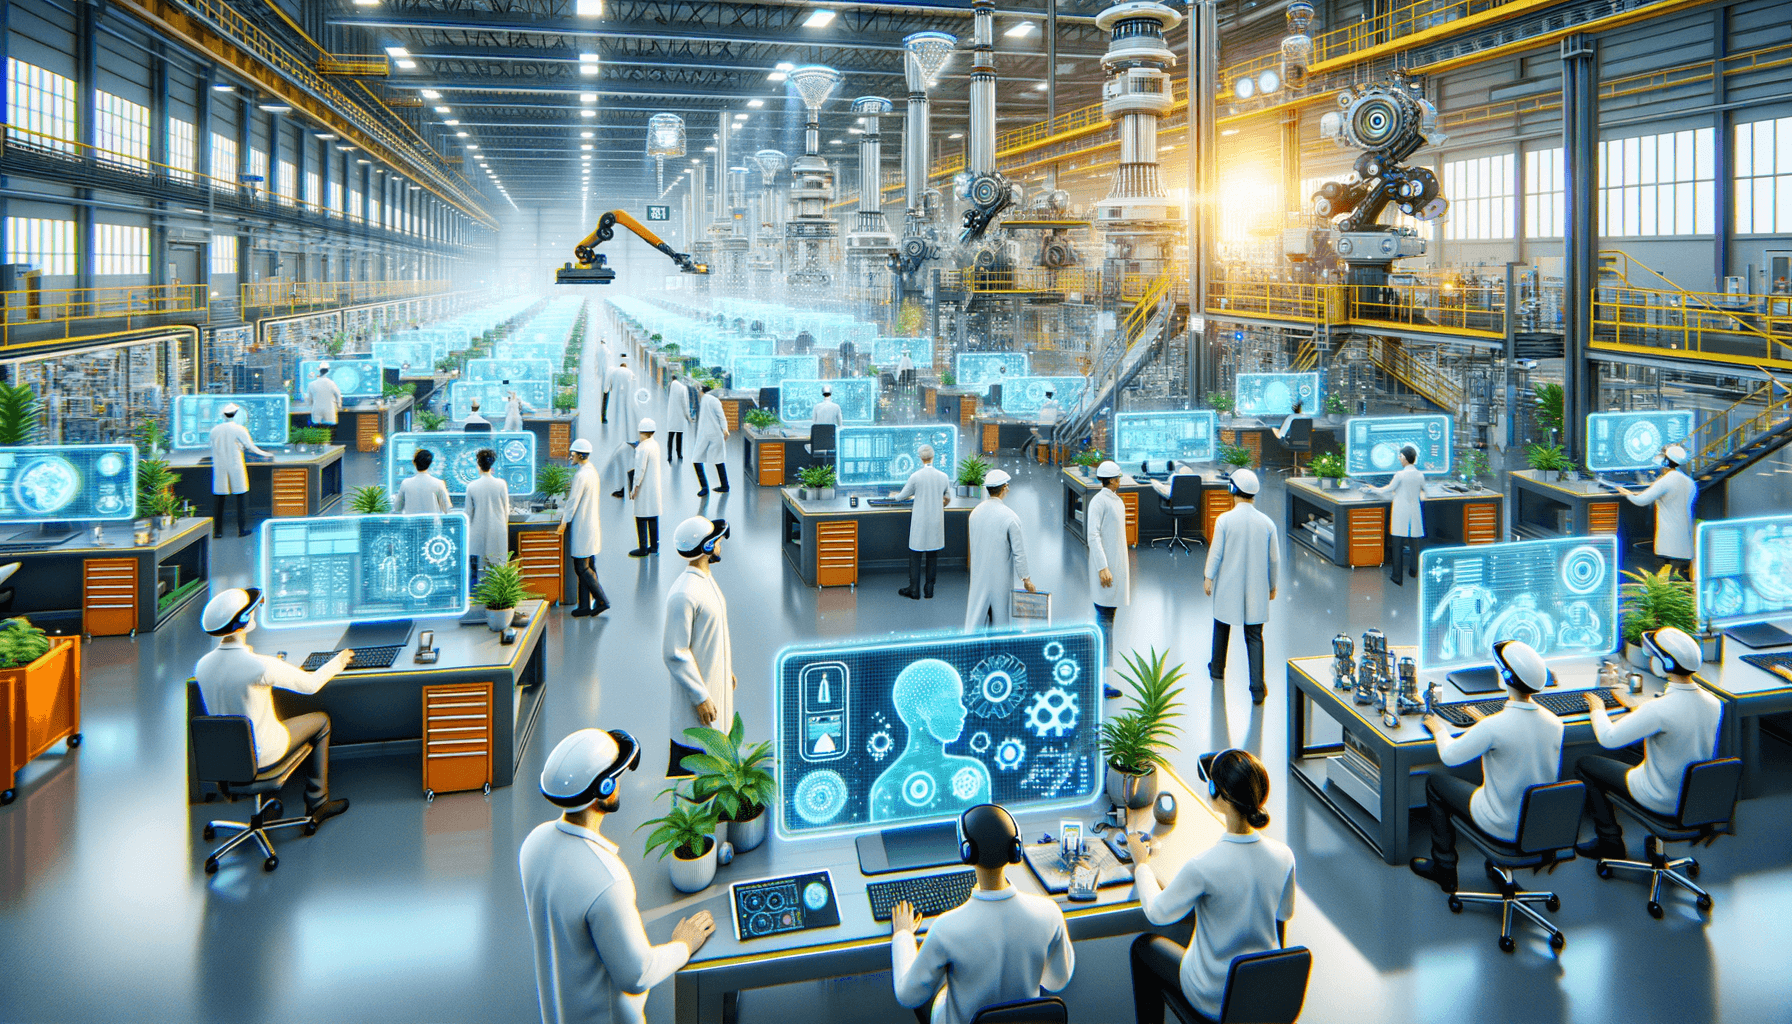 "Engineers using AR and VR innovations in futuristic manufacturing, driving AI efficiency and sustainable design in the 2030 industry landscape."